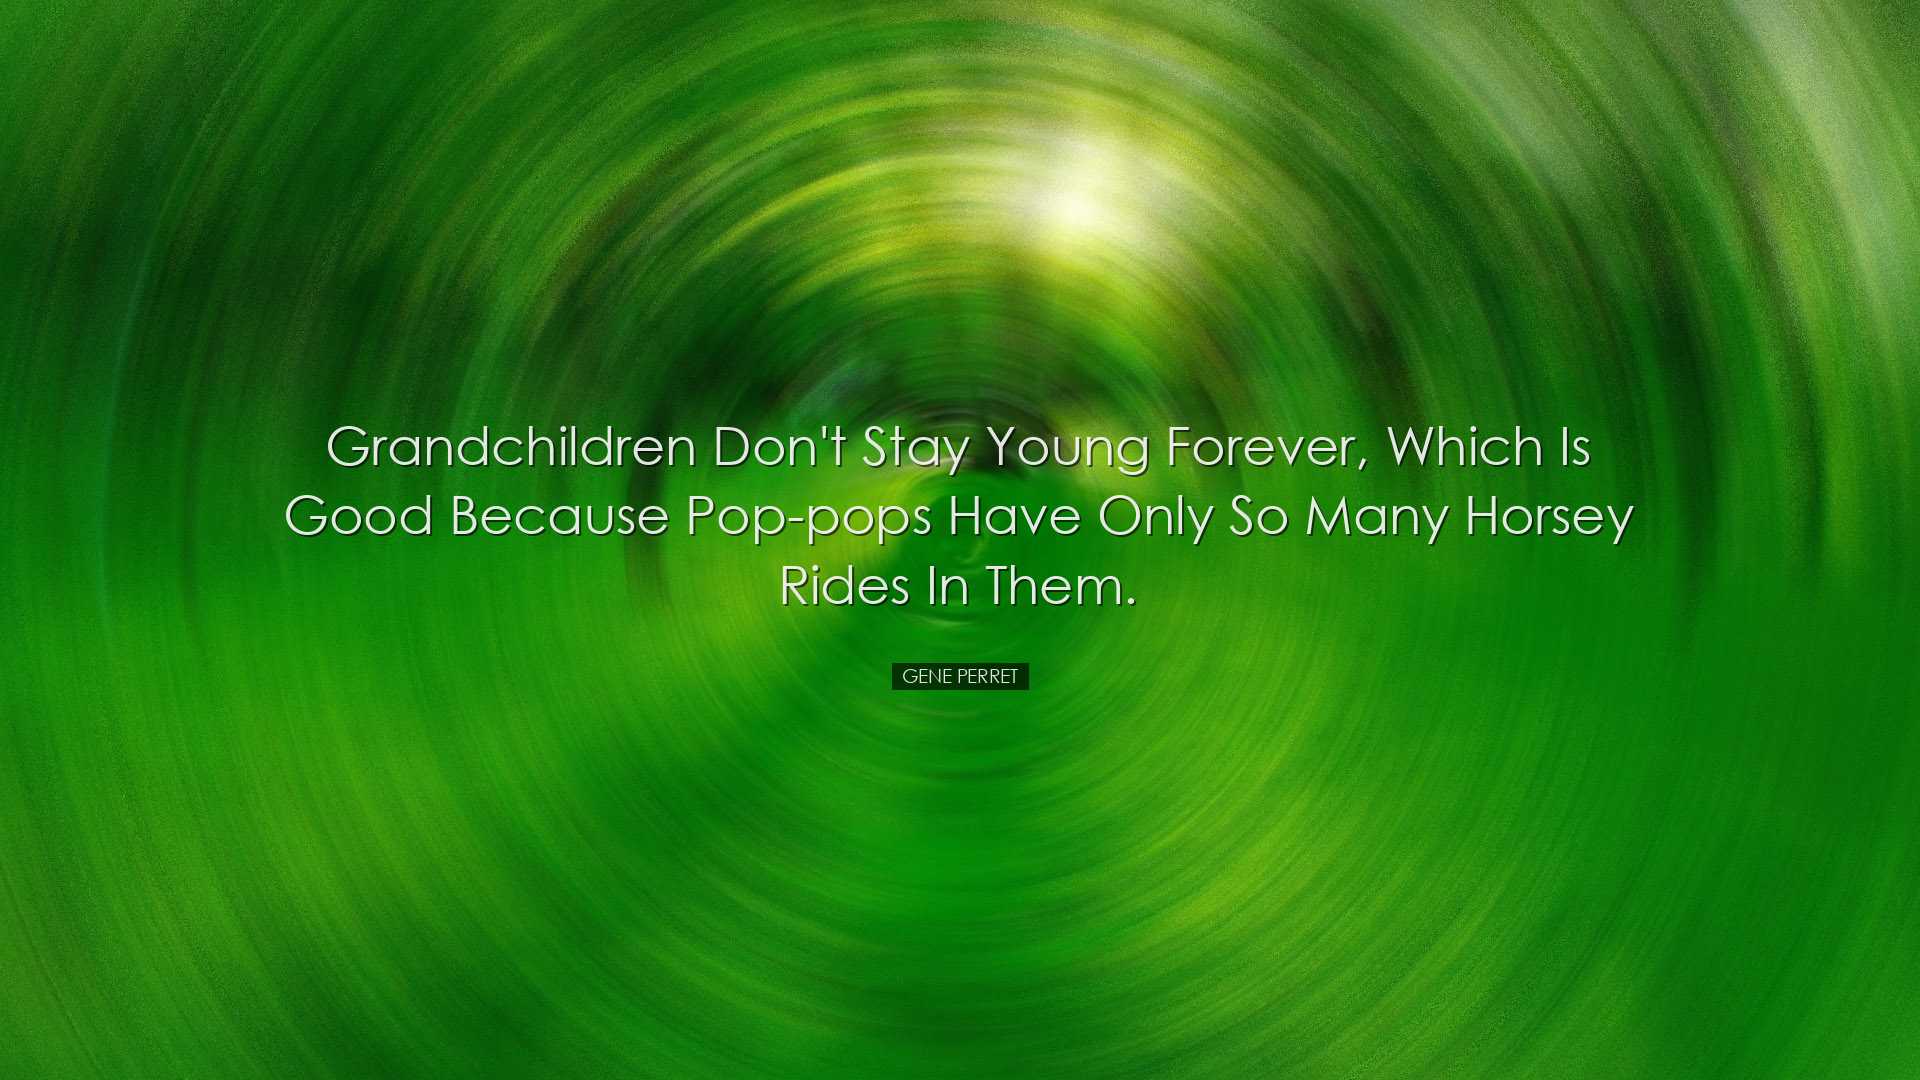 Grandchildren don't stay young forever, which is good because Pop-